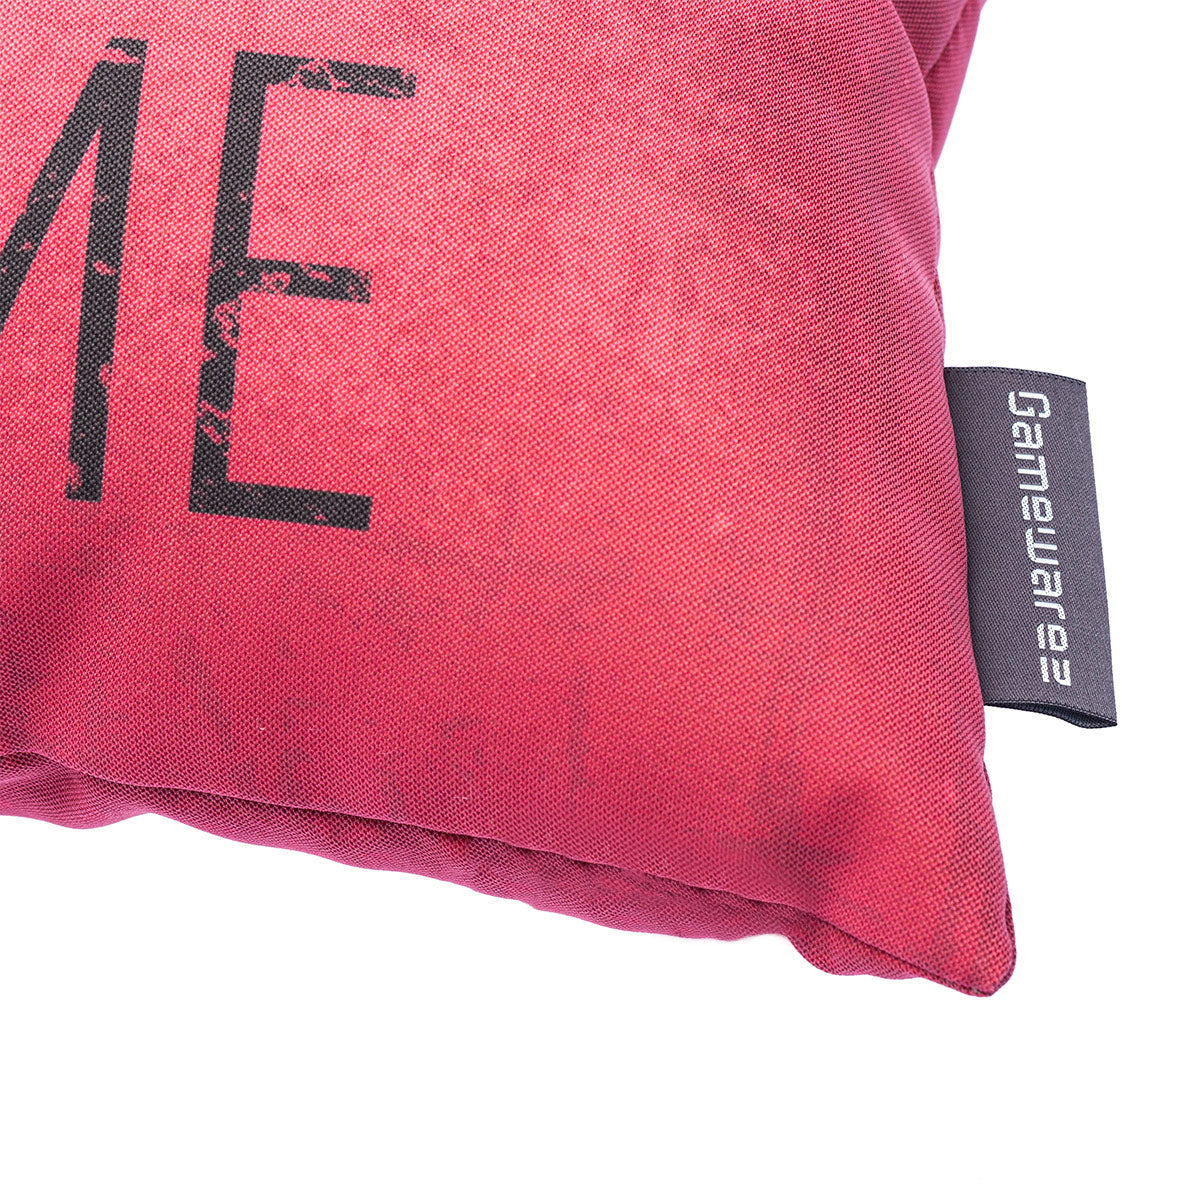 Gaming pillow "Born to Game" red